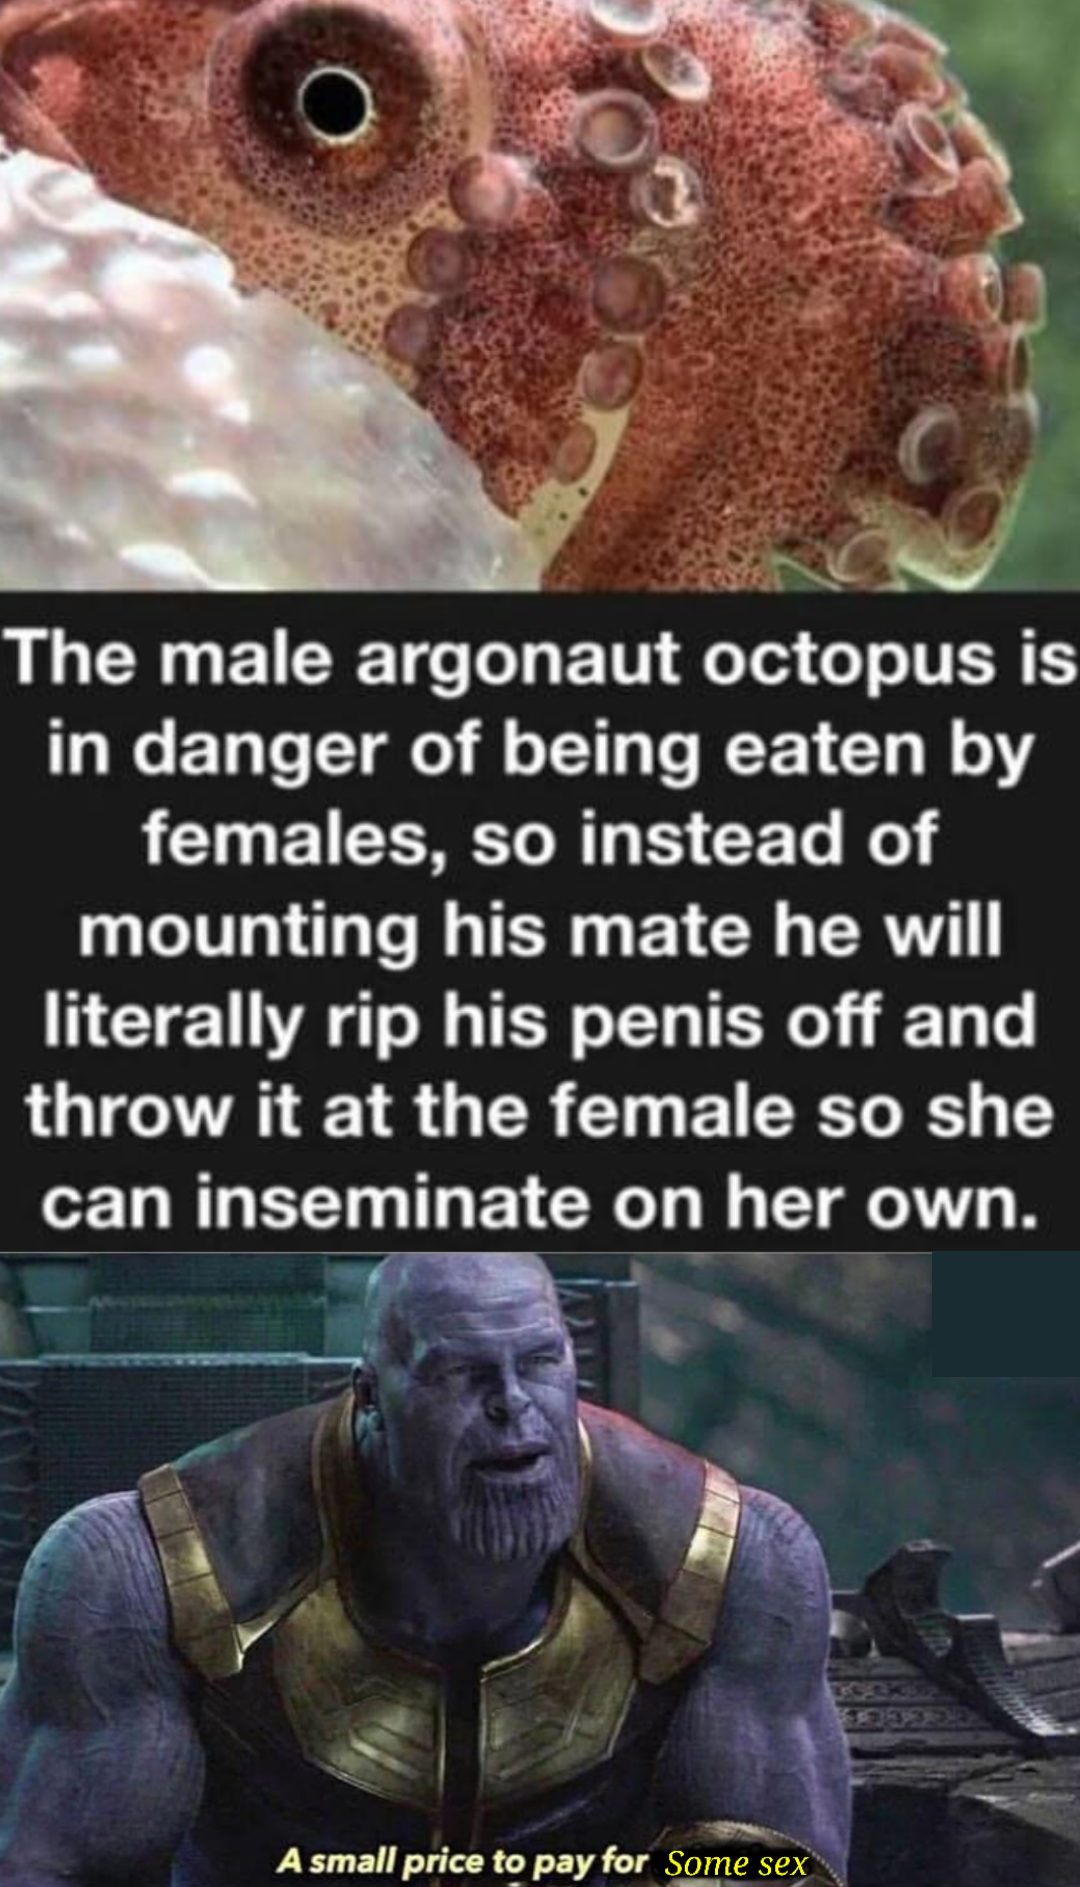 argonaut octopus meme - The male argonaut octopus is in danger of being eaten by females, so instead of mounting his mate he will literally rip his penis off and throw it at the female so she can inseminate on her own. A small price to pay for some sex